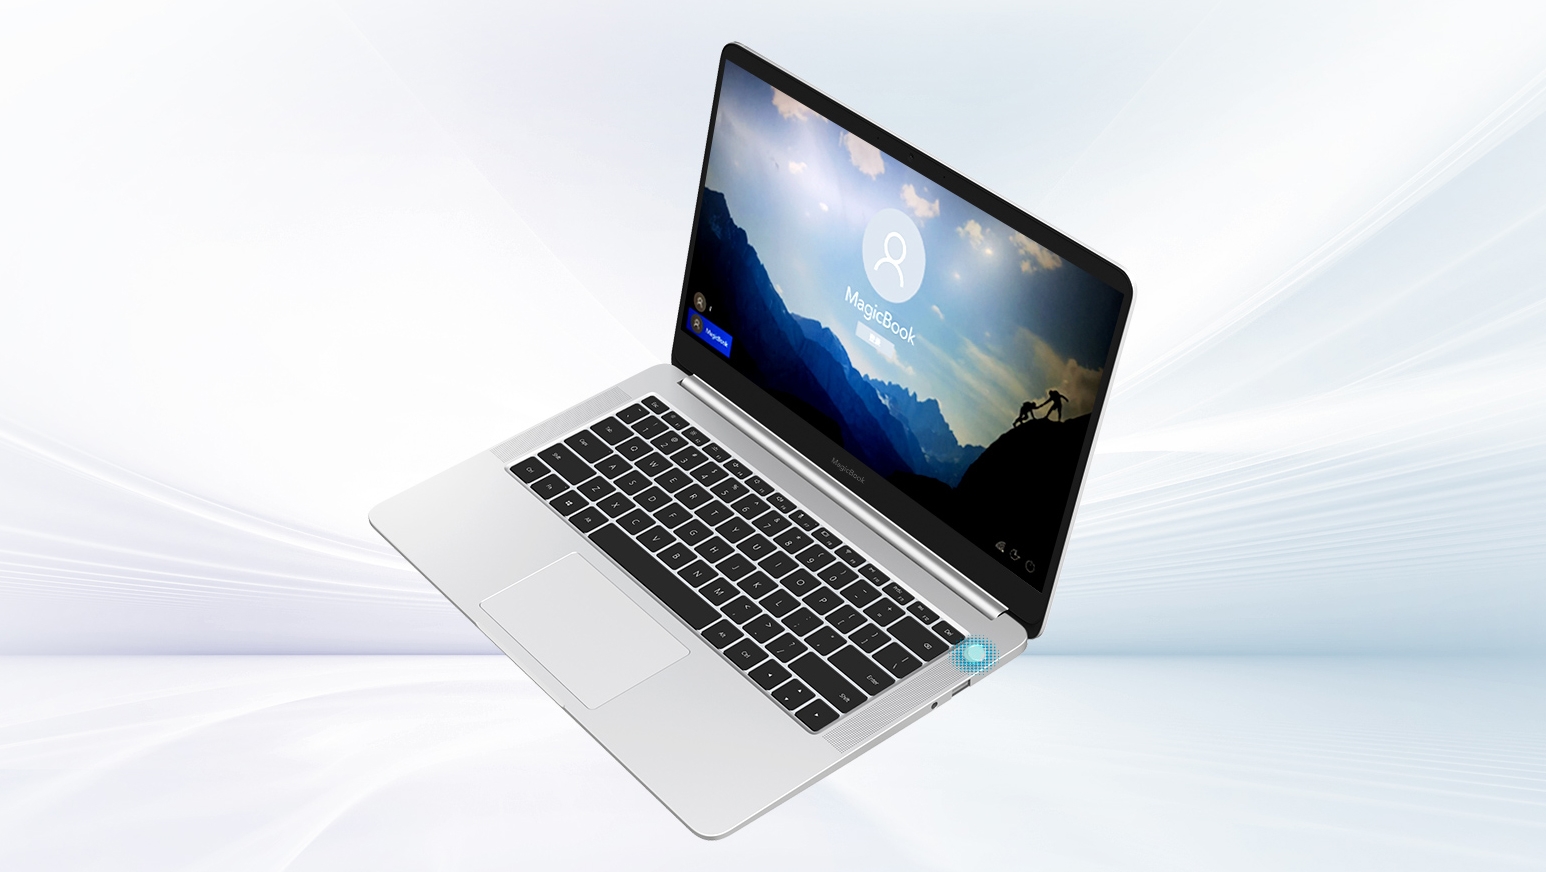 Pc manager honor magicbook. Ноутбук Honor MAGICBOOK 14 Ryzen 5. Ноутбук Honor MAGICBOOK 15. Ультрабук Honor MAGICBOOK 15, 15.6". Un3481 ноутбук Honor.